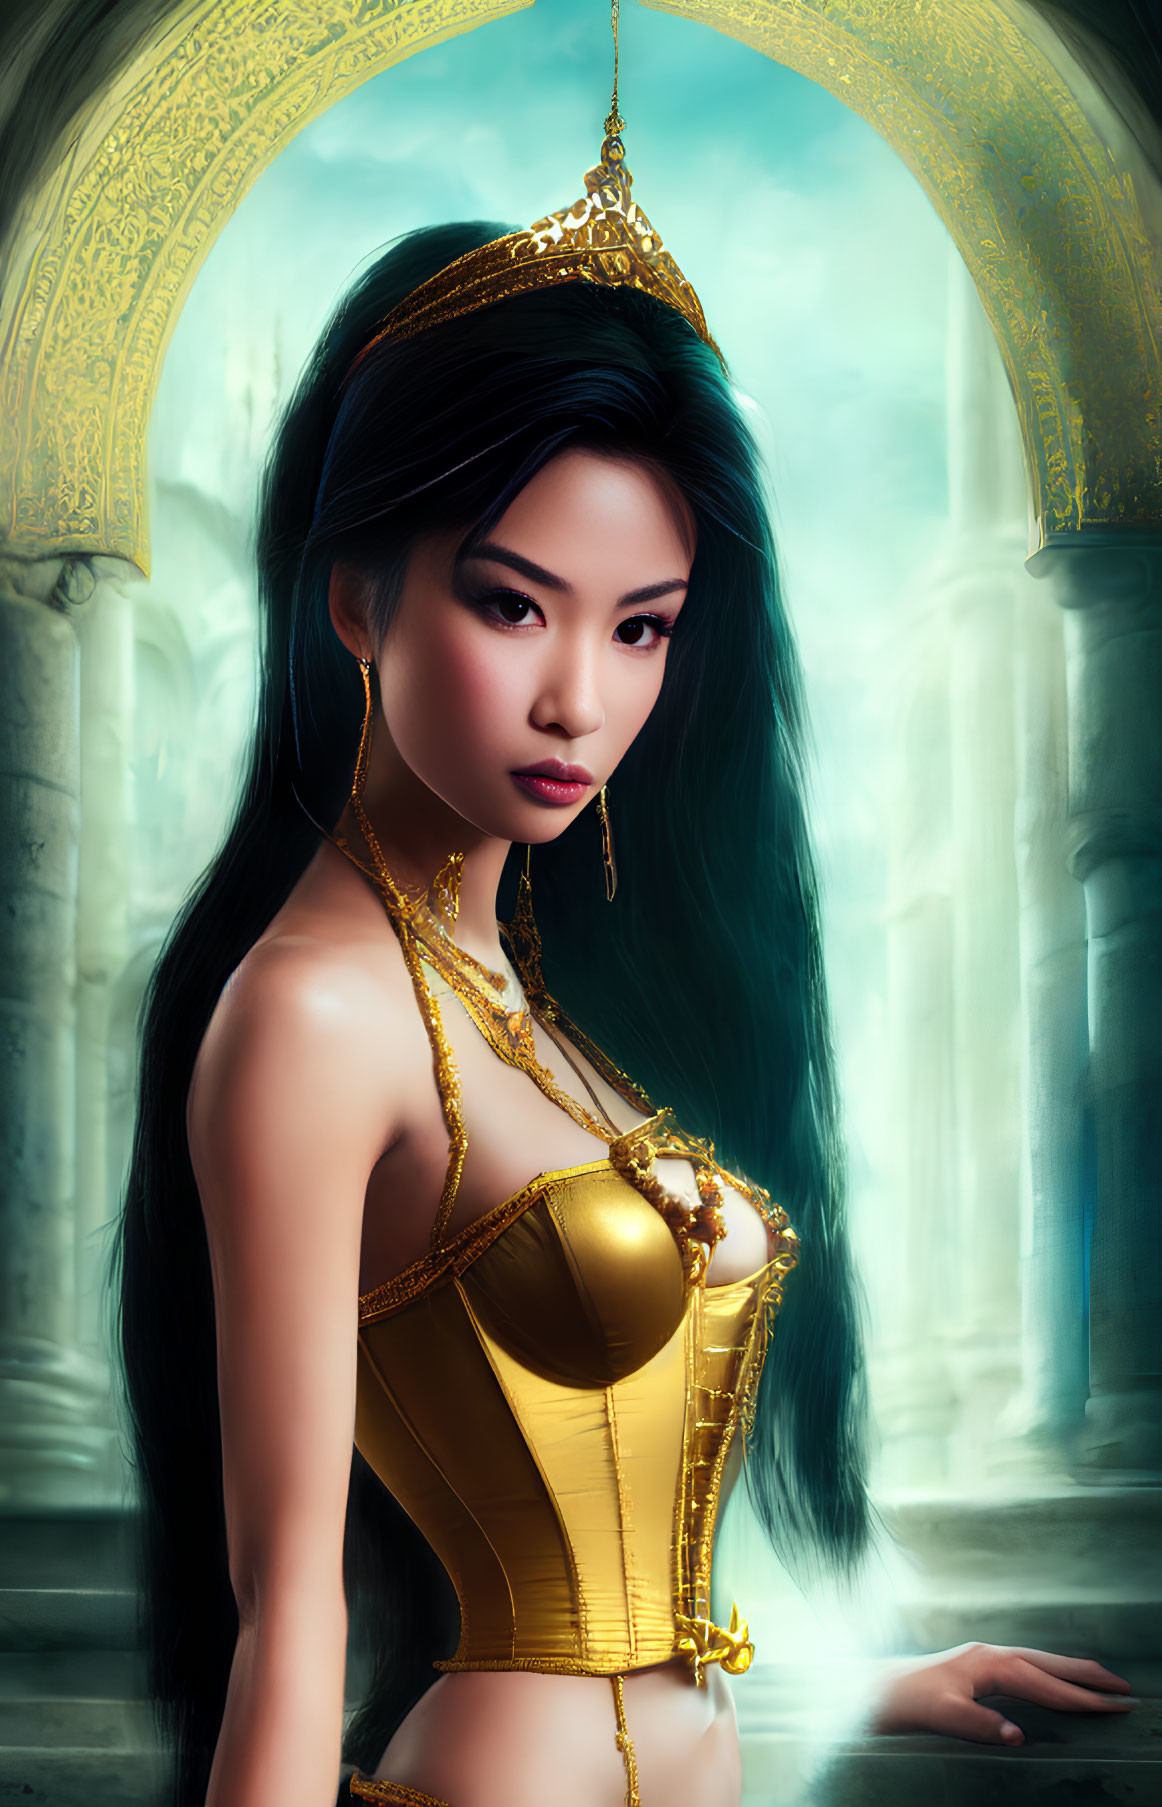 Digital artwork of regal woman in golden attire and crown in palace.